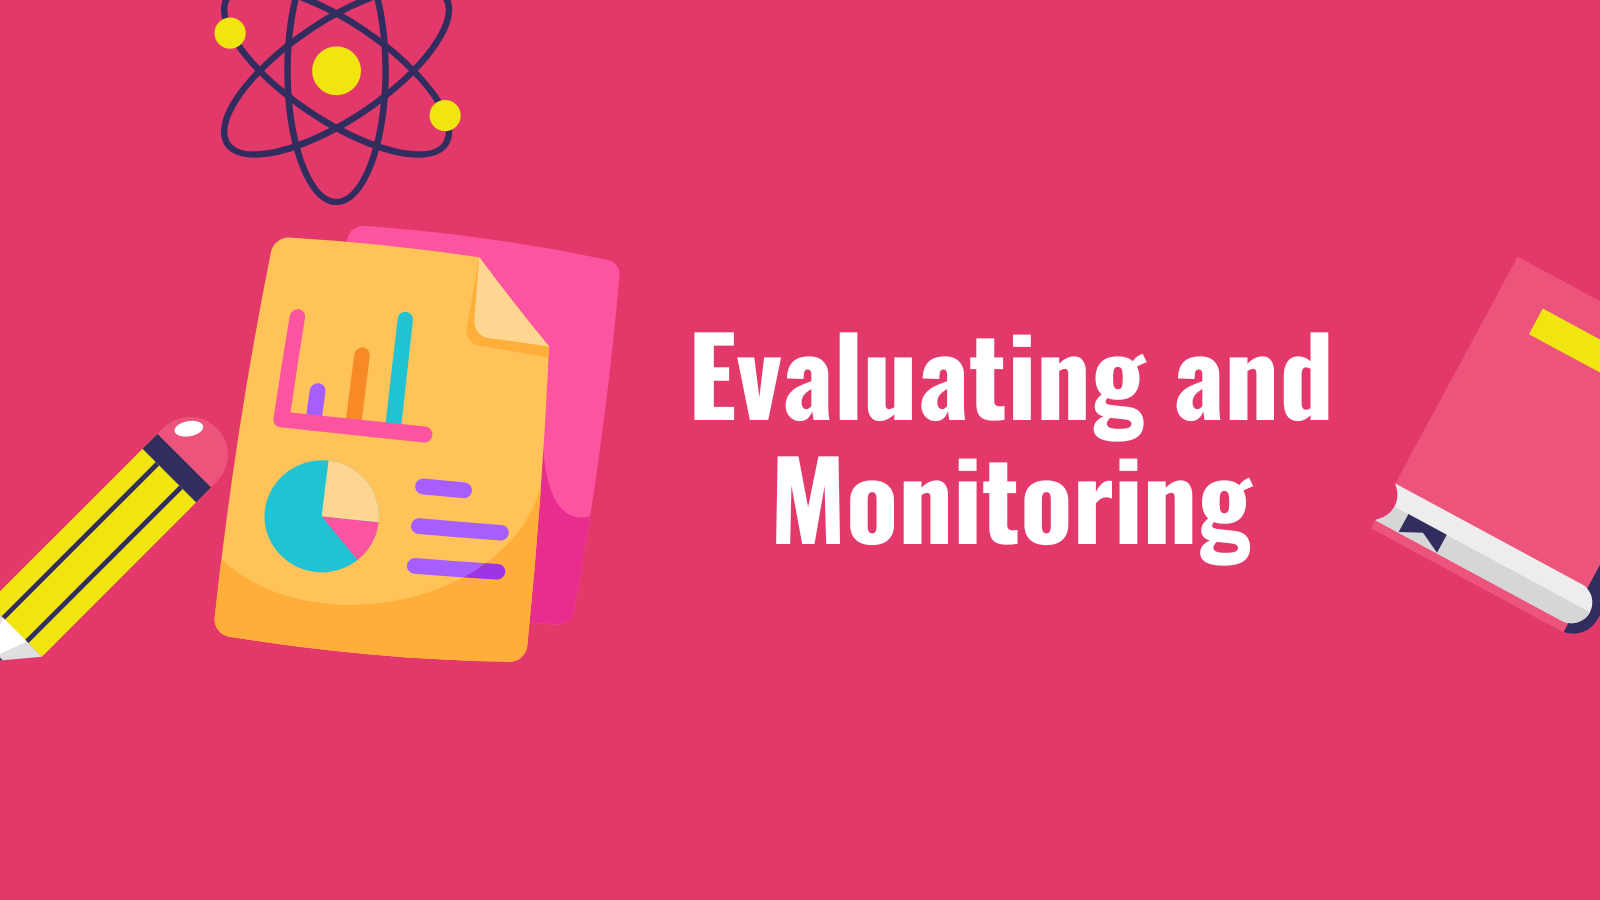 Evaluating and Monitoring